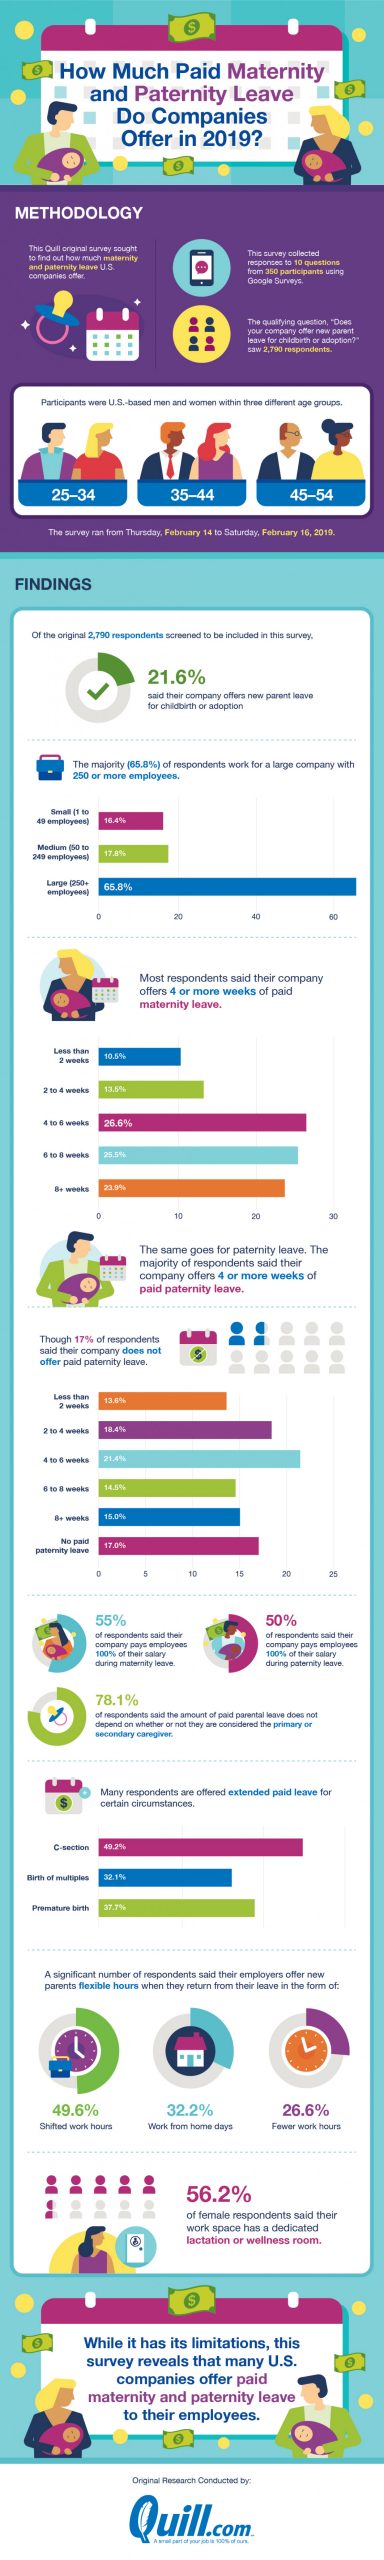 Paid Maternity Leaves in 2019 #infographic